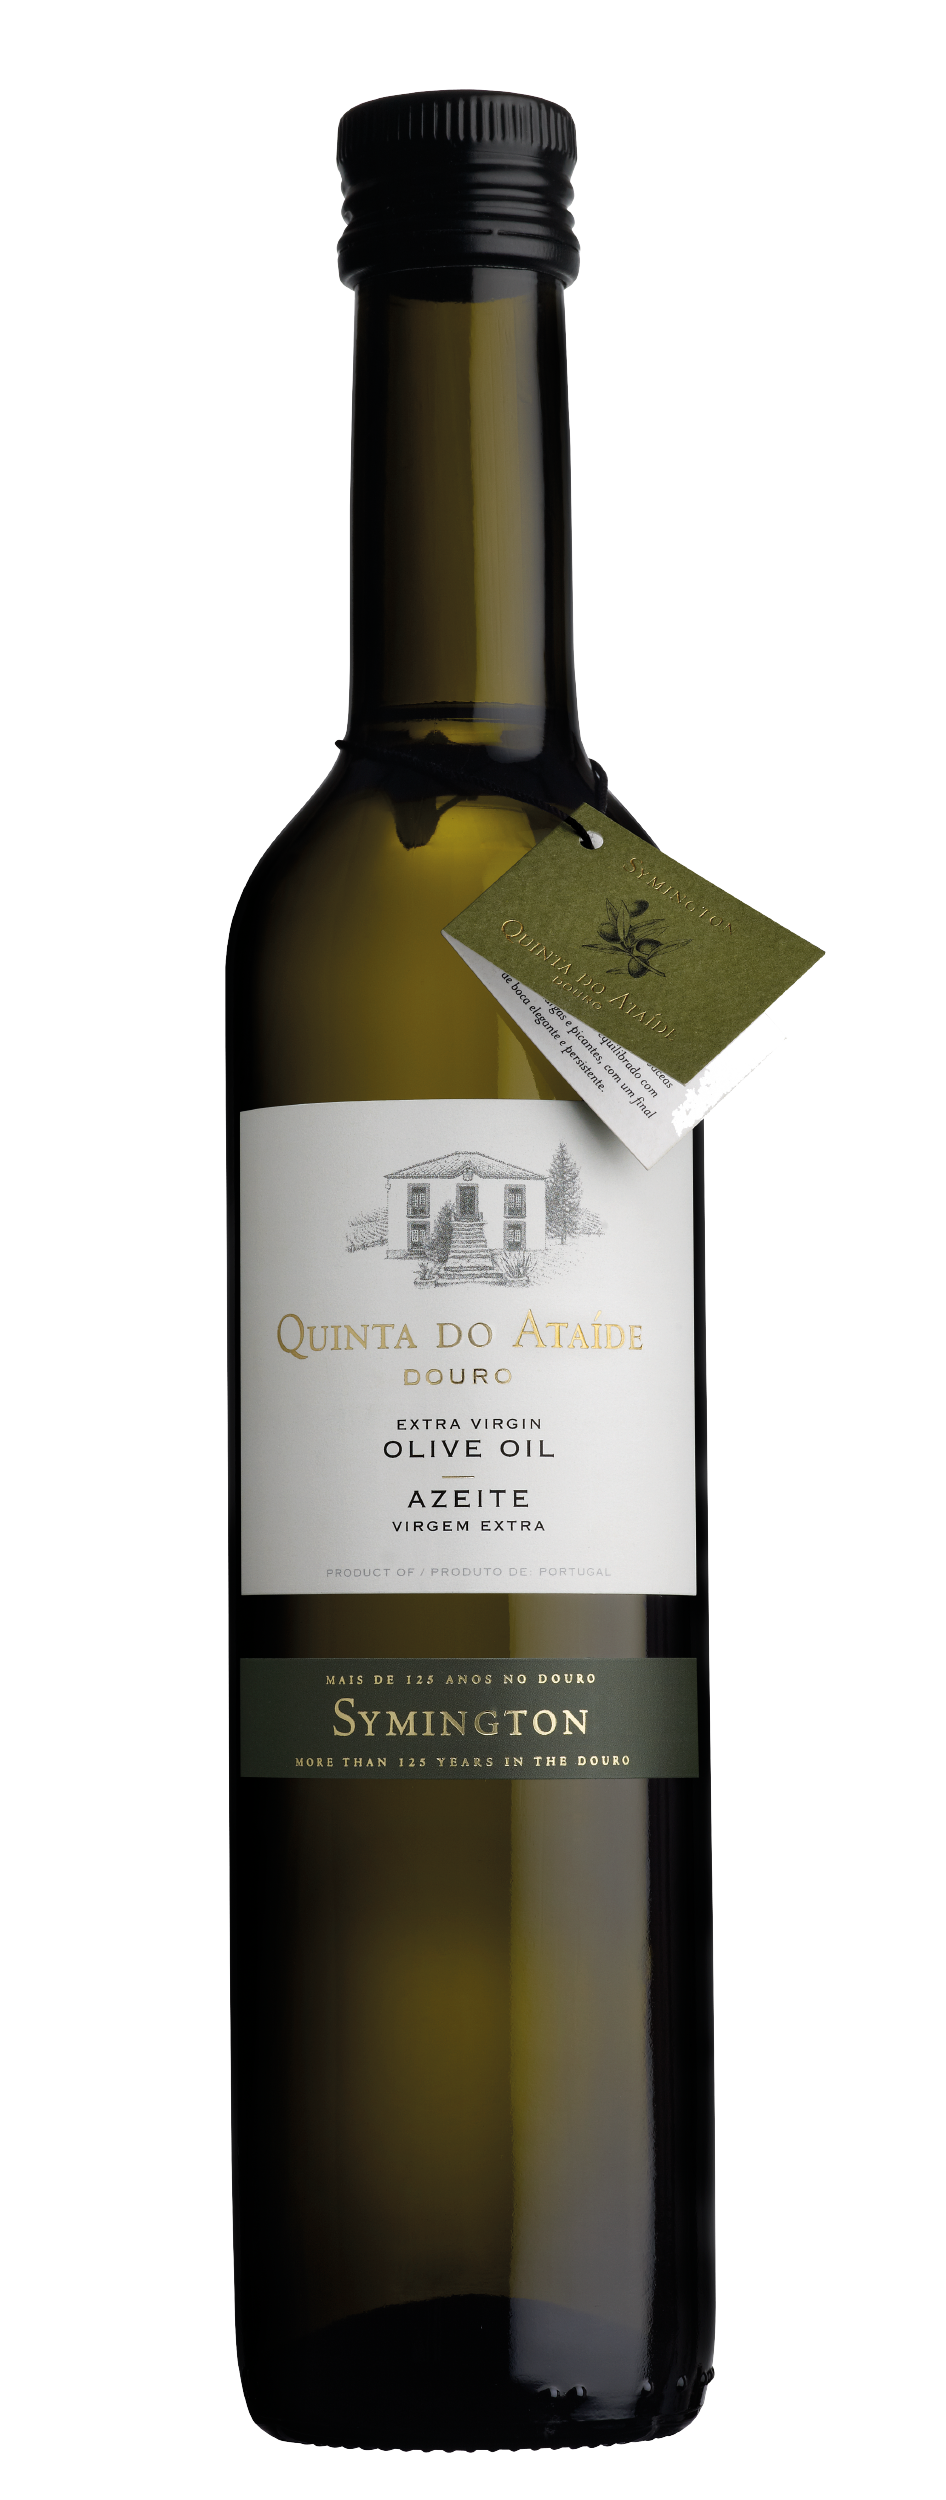 Product Image for QUINTA DO ATAIDE EV OLIVE OIL